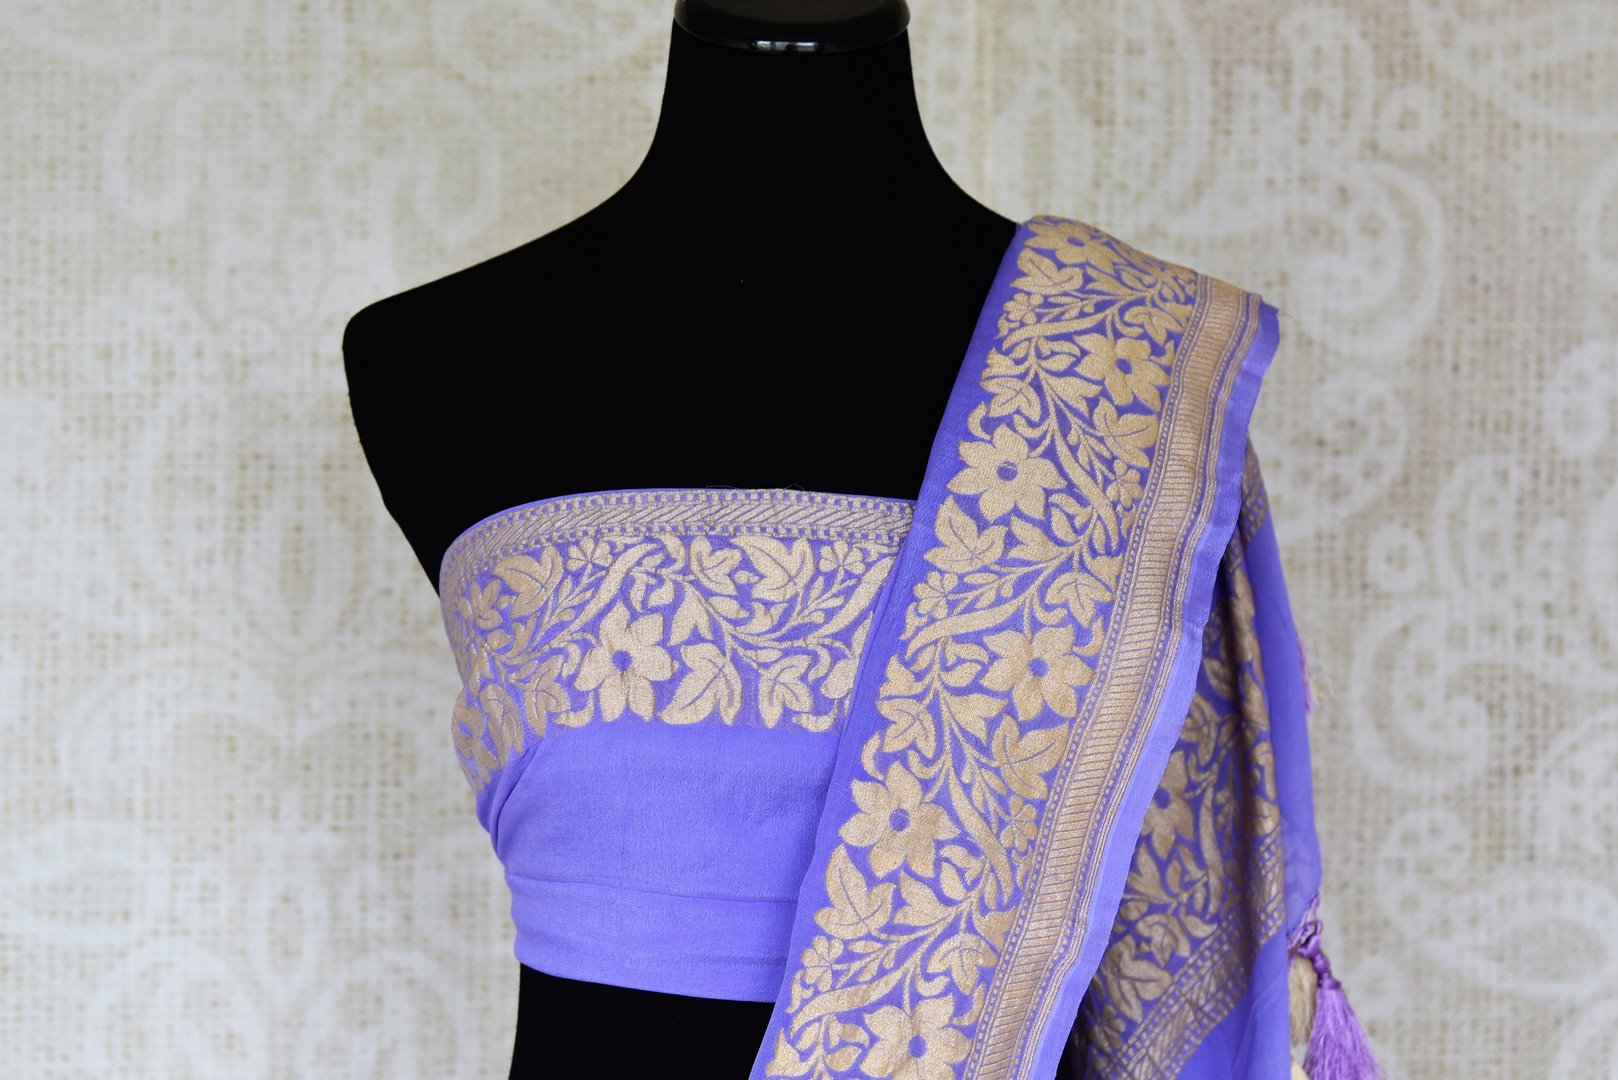 Buy mauve purple georgette Banarasi saree online in USA with silver foliate zari border. Elevate your traditional saree style with beautiful Indian Banarasi saris from Pure Elegance Indian fashion store in USA. We also have a stunning variety of bridal saris for Indian brides in USA. Shop now.-blouse pallu